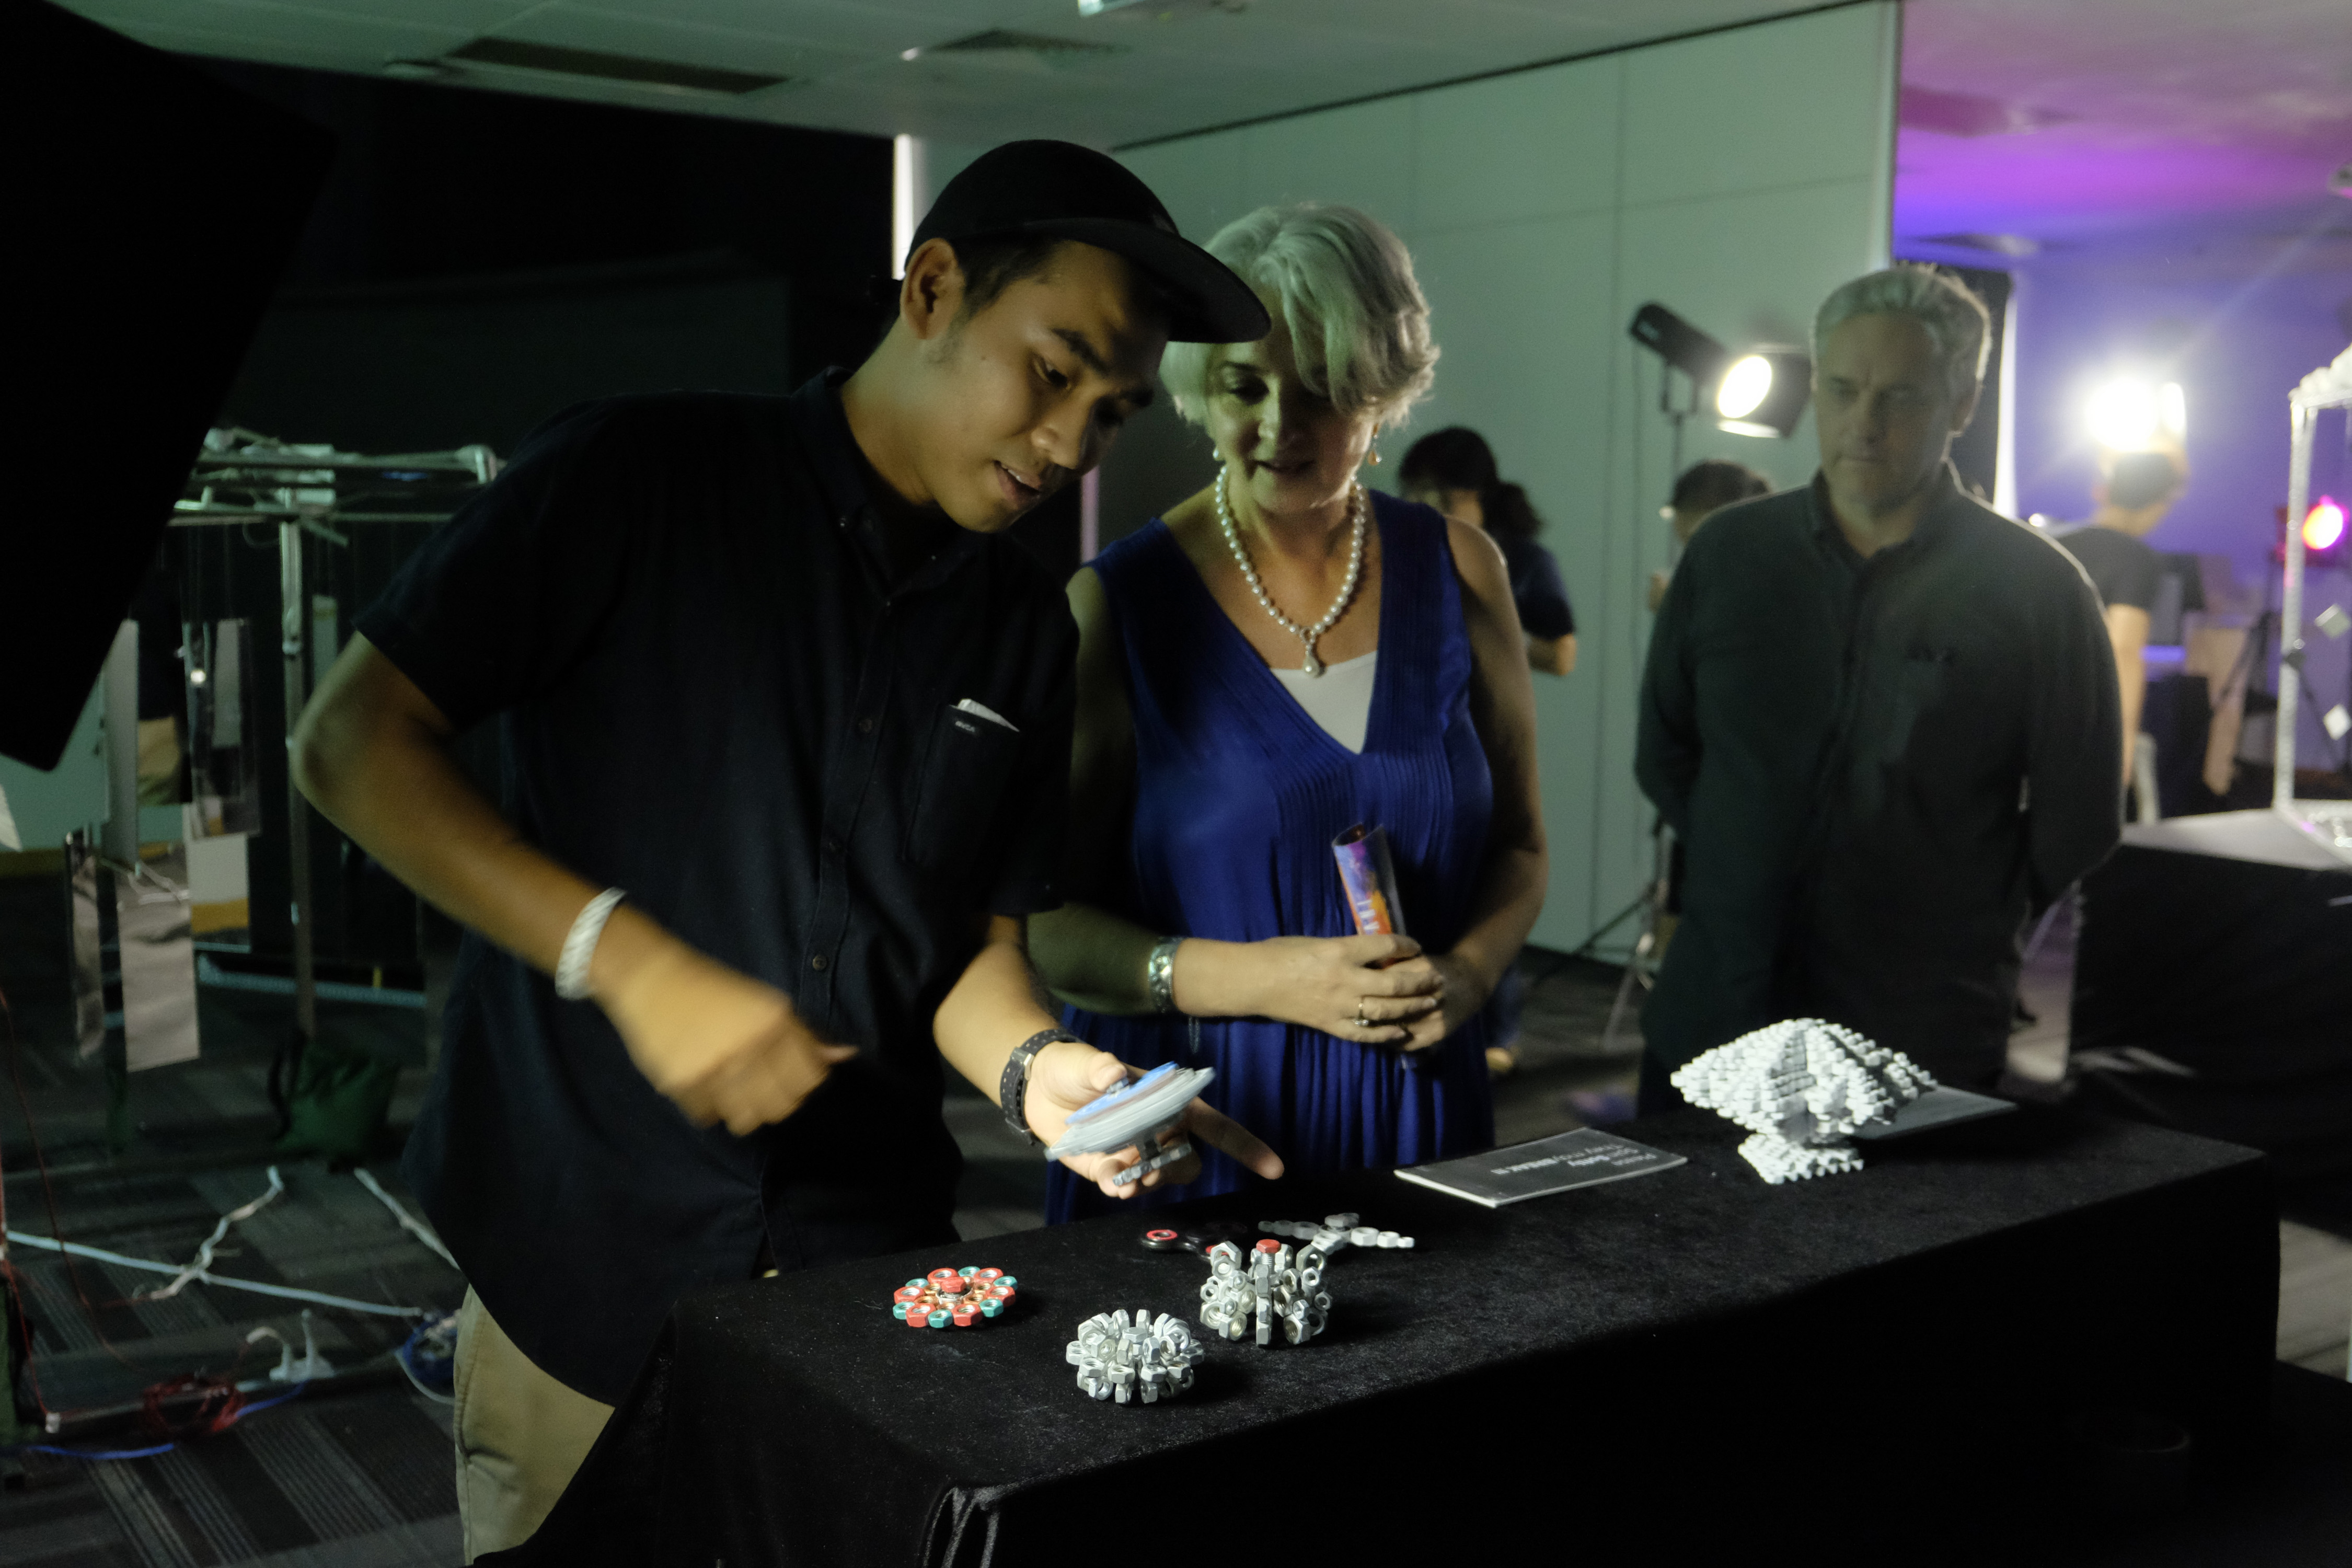 Sophea Phoung (left) demonstrates his project entitled The Illusion of Spinner to RMIT Vietnam President Professor Gael McDonald (middle) and Senior Educator Andy Stiff (right).